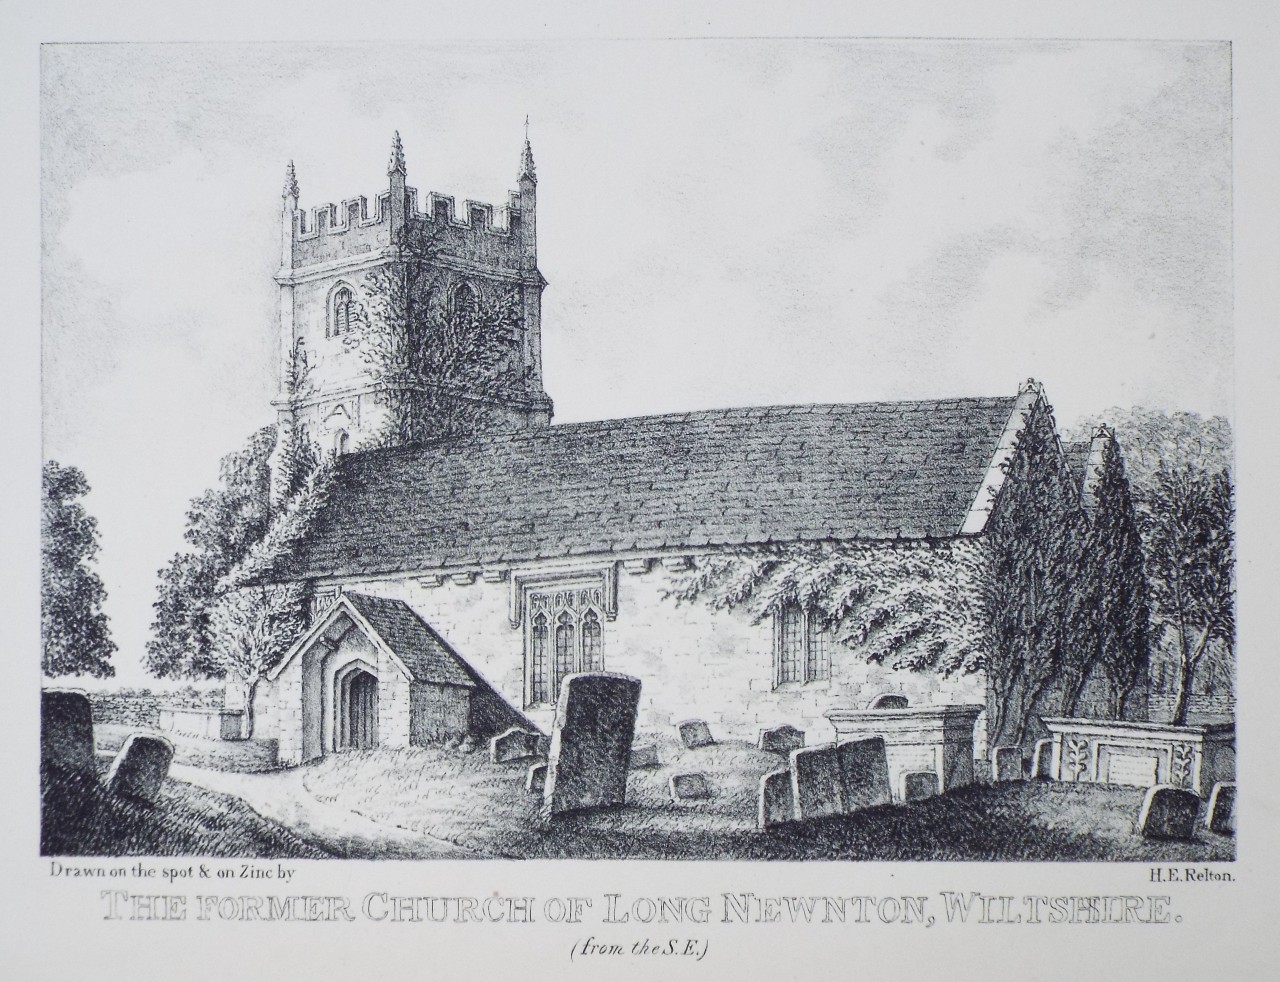 Zinc Lithograph - The Former Church of Long Newnton, Wiltshire. (from the S.E.) - Relton